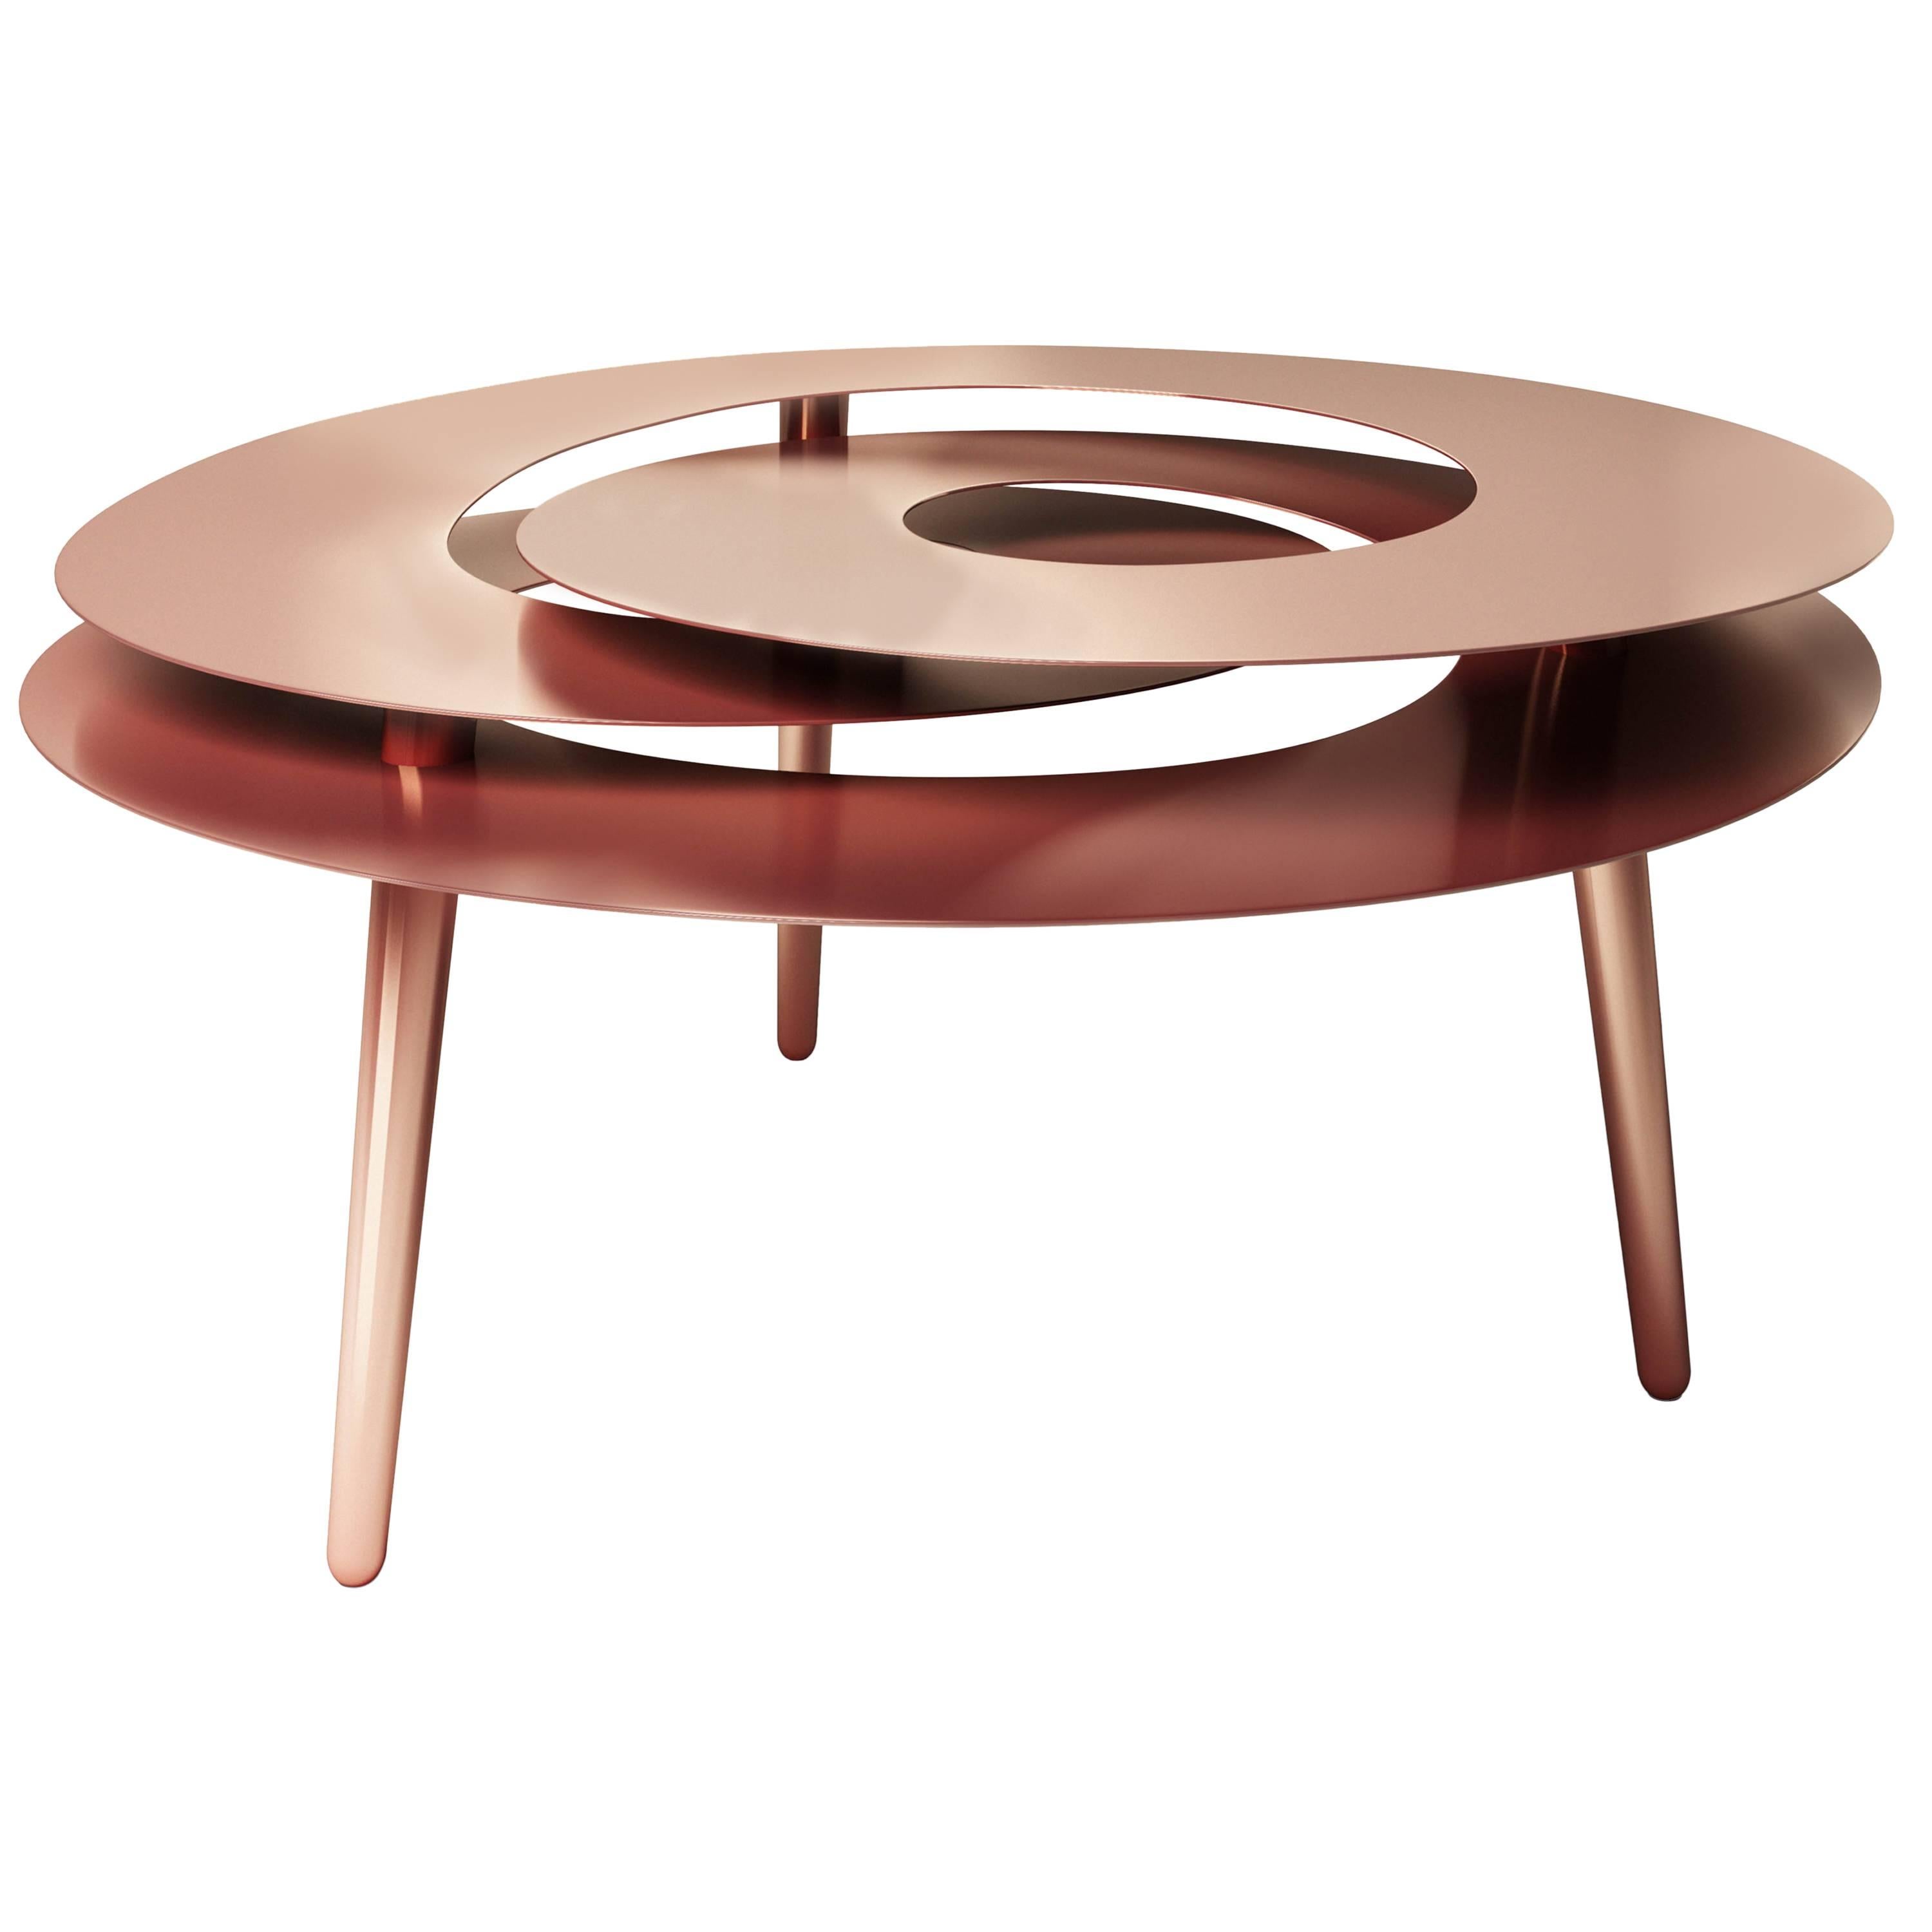 Rollercoaster Large Table, Copper-Plated Stainless Steel